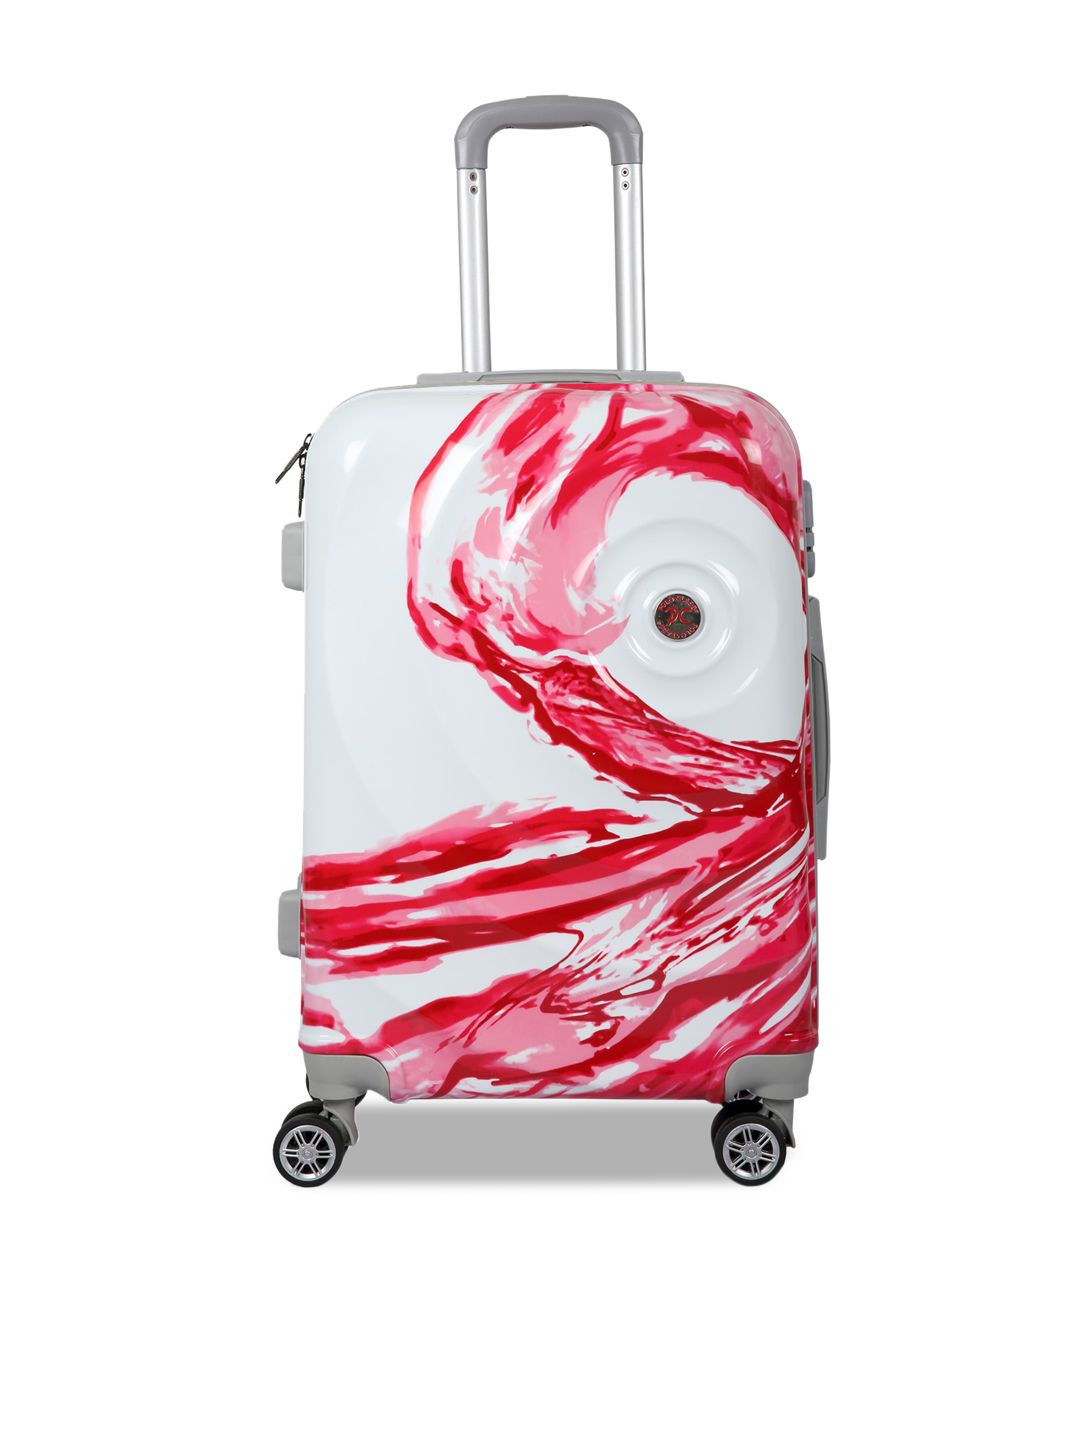 Polo Class Red & White Printed Hard-Sided Medium Trolley Suitcase Price in India